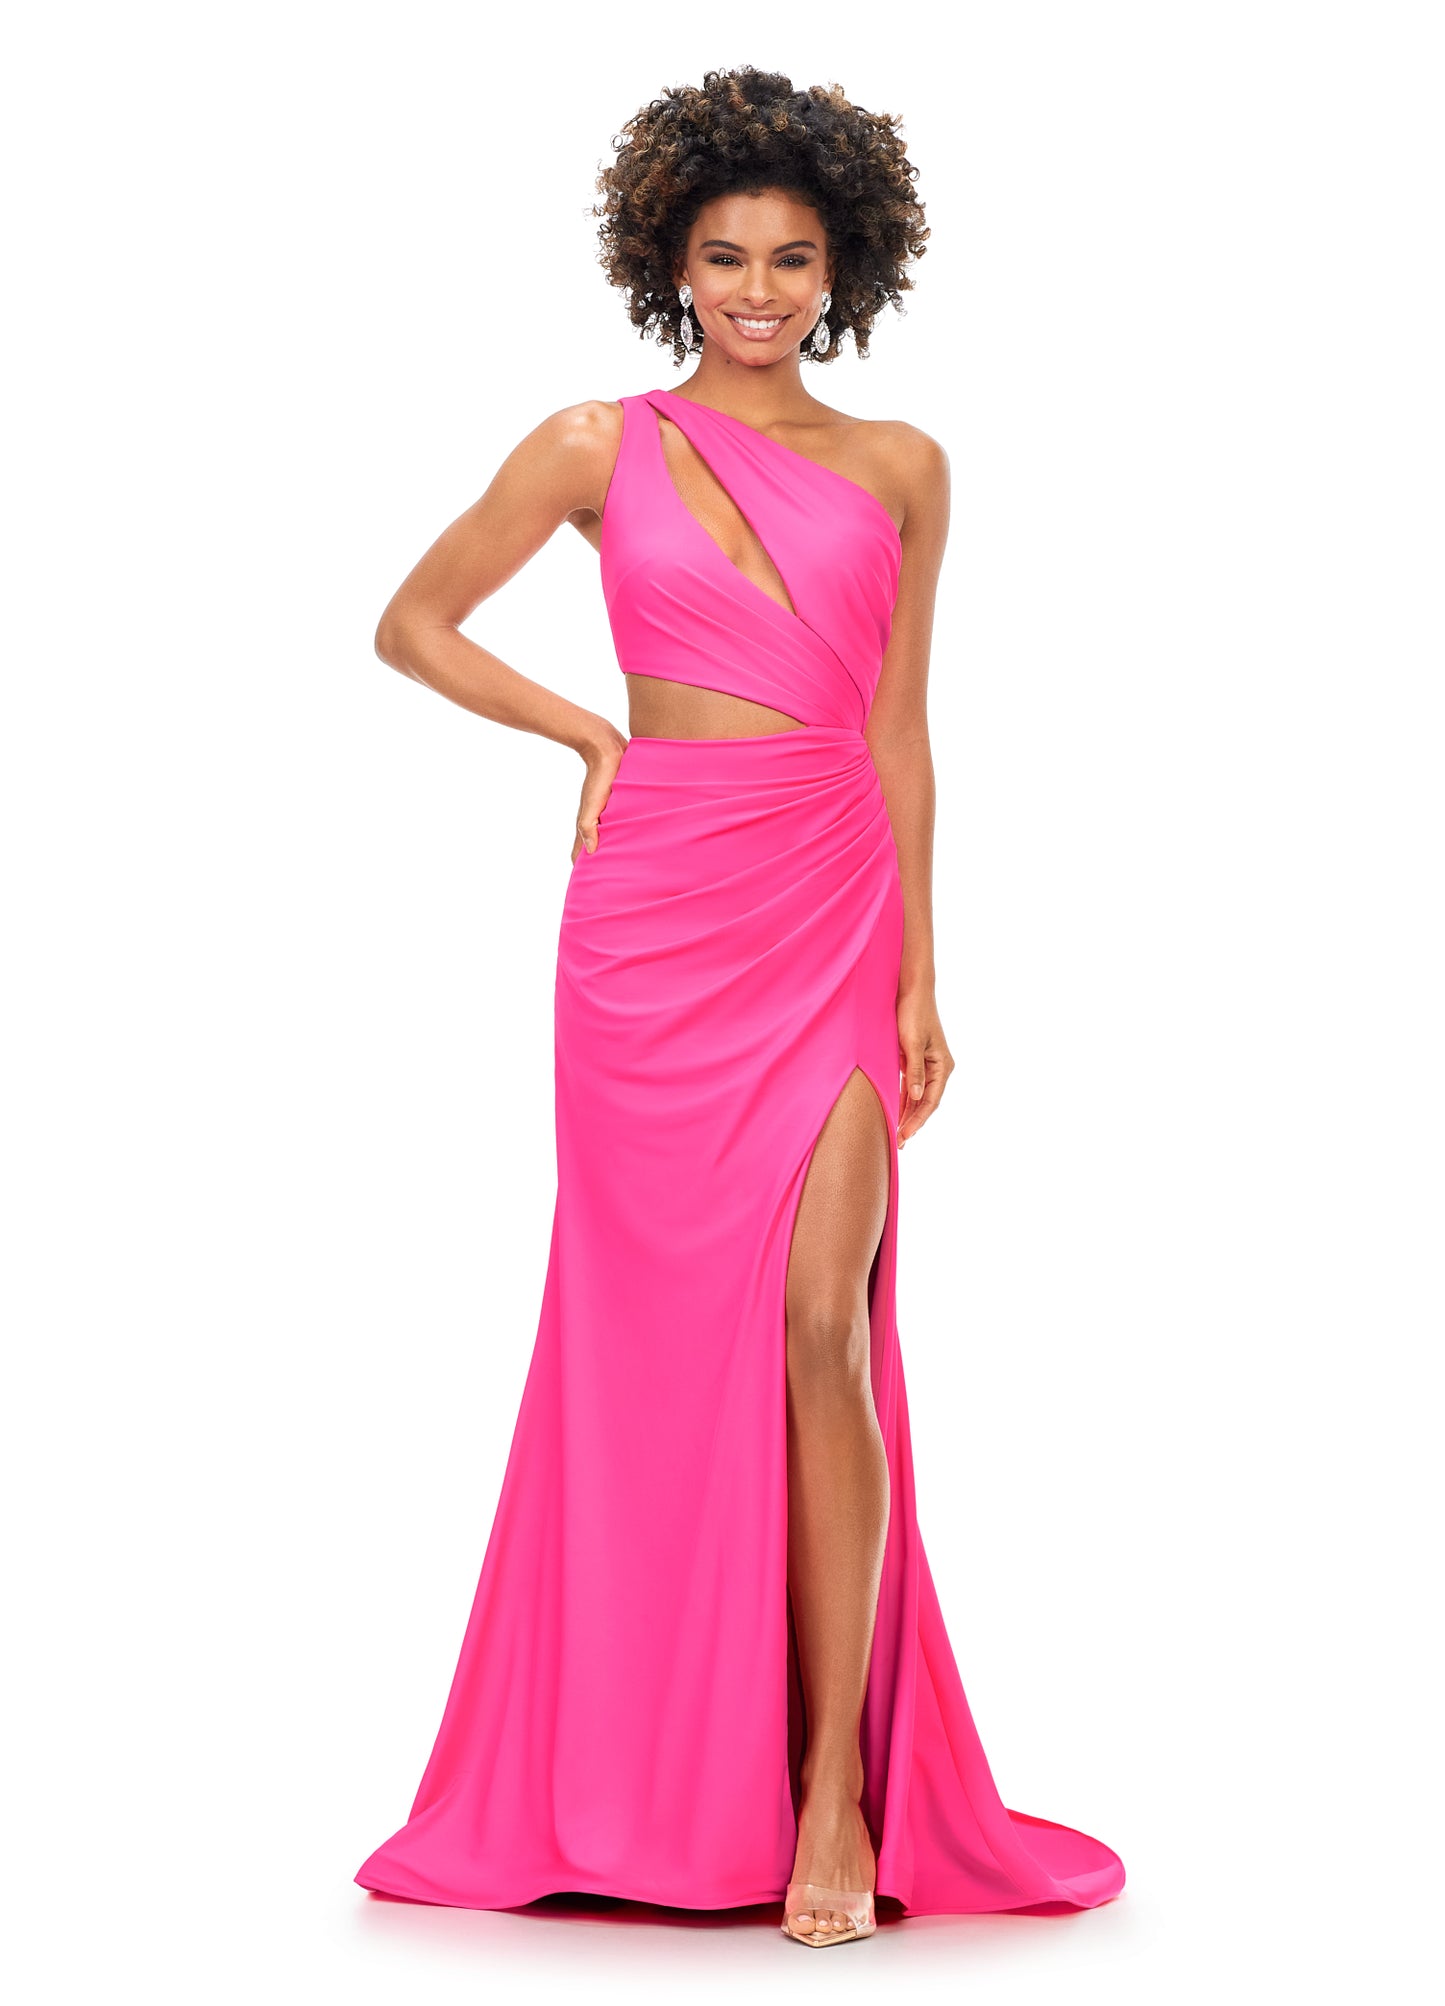 Ashley Lauren 11303 This one shoulder jersey gown features a ruched bodice with asymmetrical cut outs. The ruching continues onto the fitted skirt with slit. The look is complete with an exposed metal zipper back.